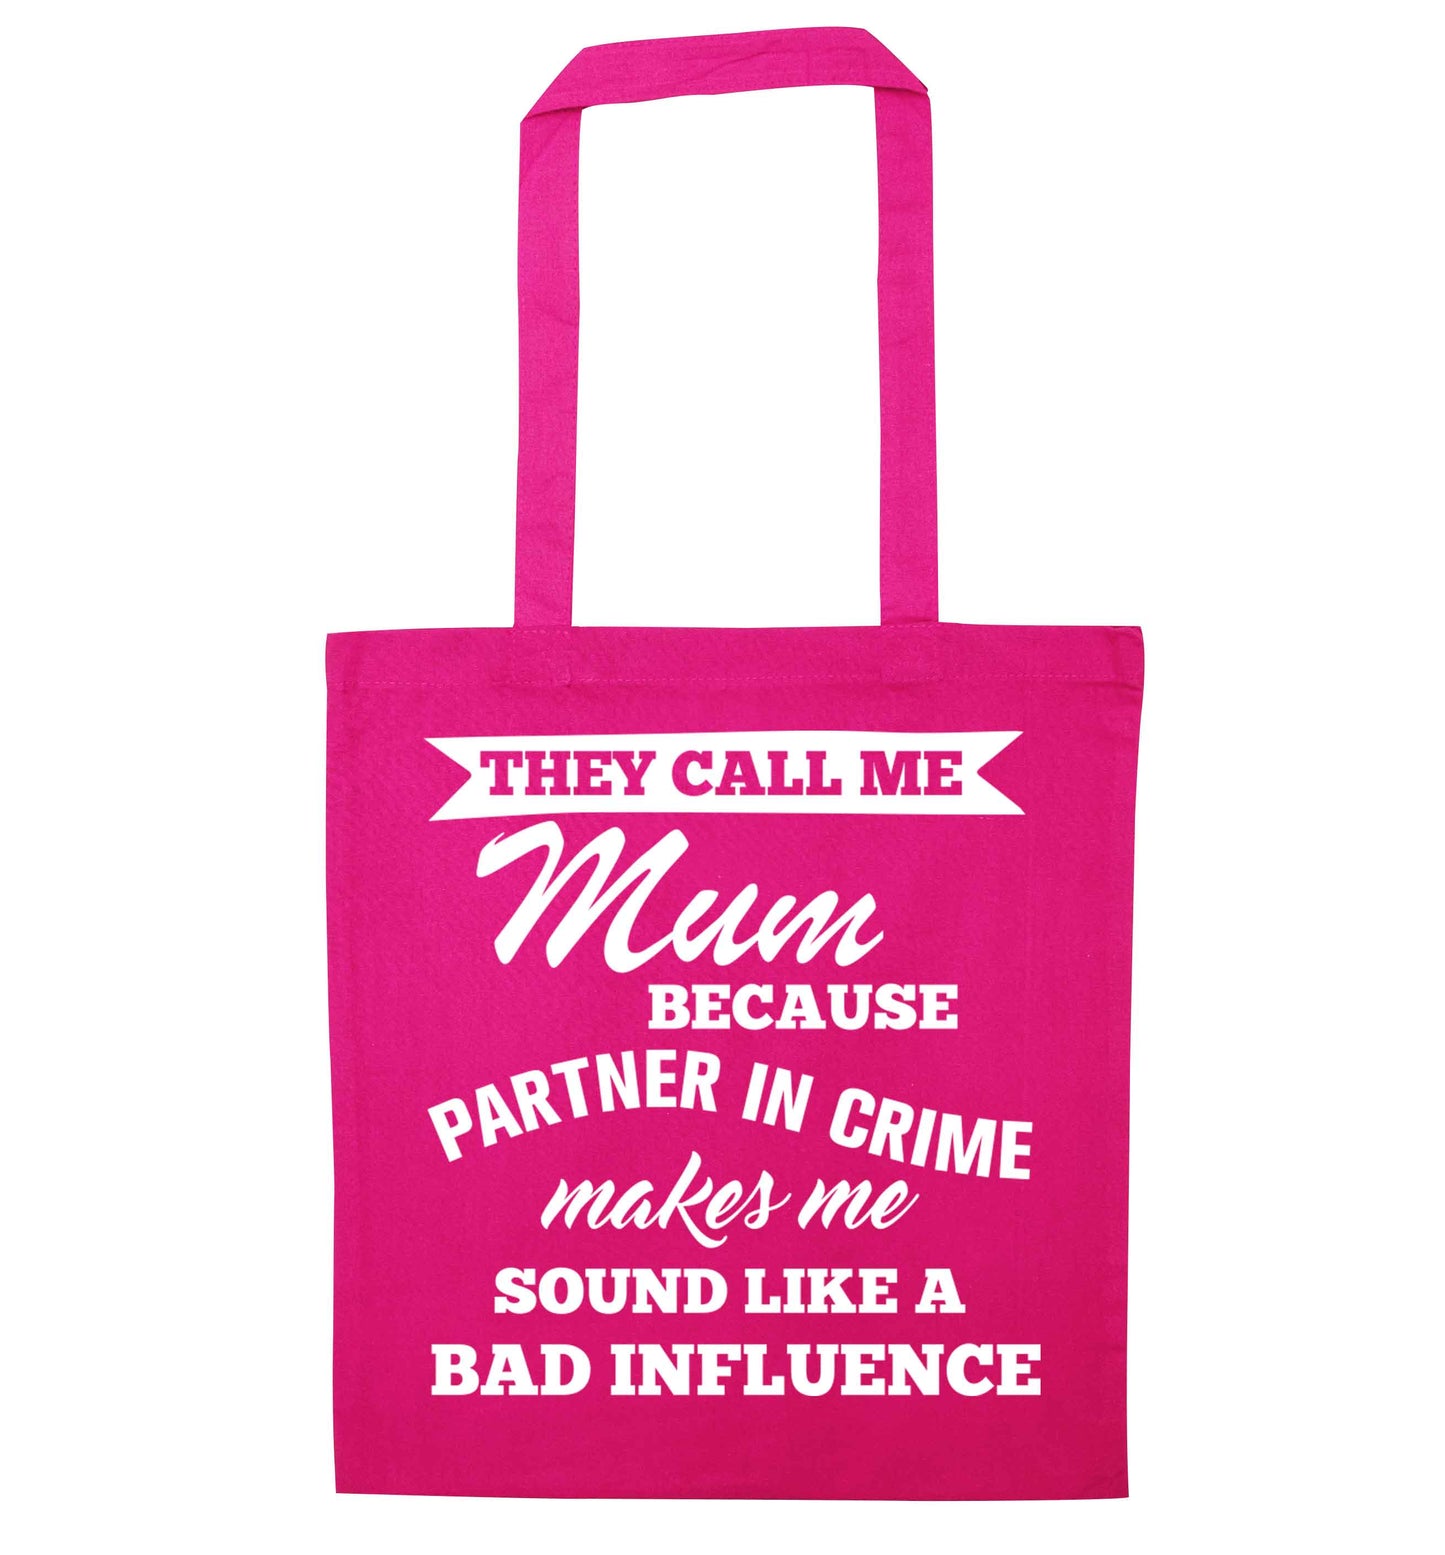 They call me mum because partner in crime makes me sound like a bad influence pink tote bag